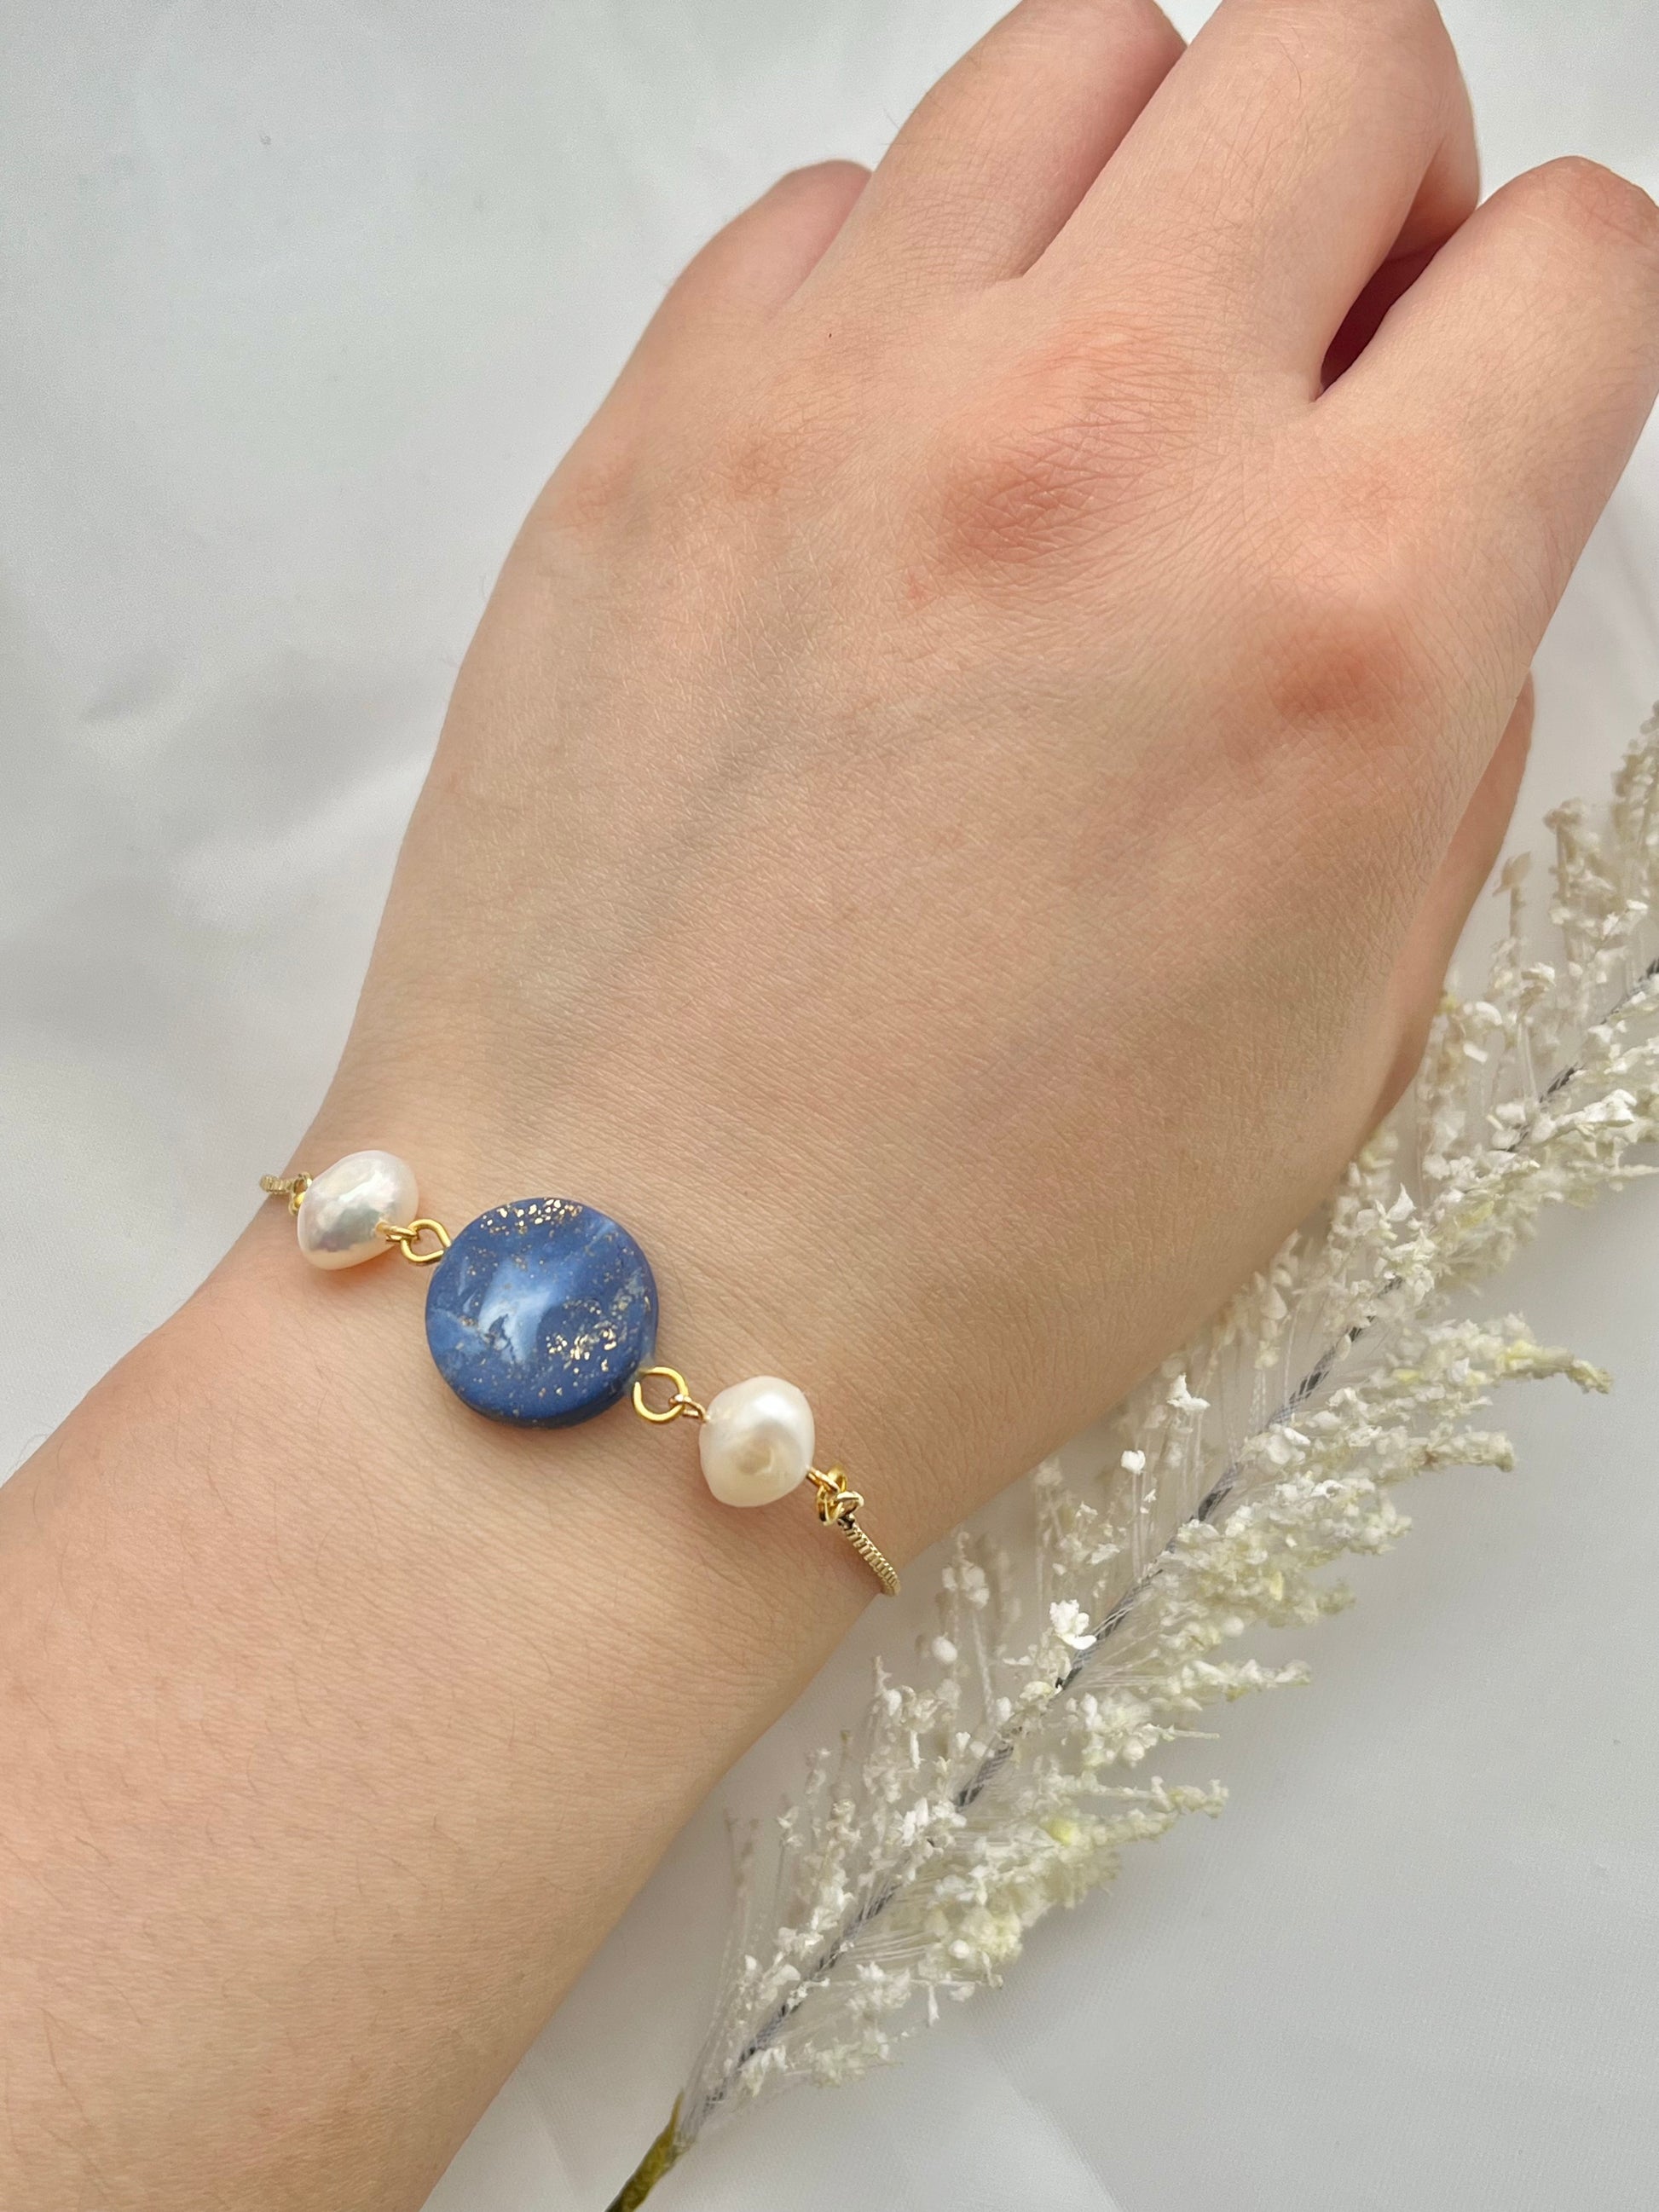 A bracelet with a dark blue clay circle with freshwater pearls on either side on a hand